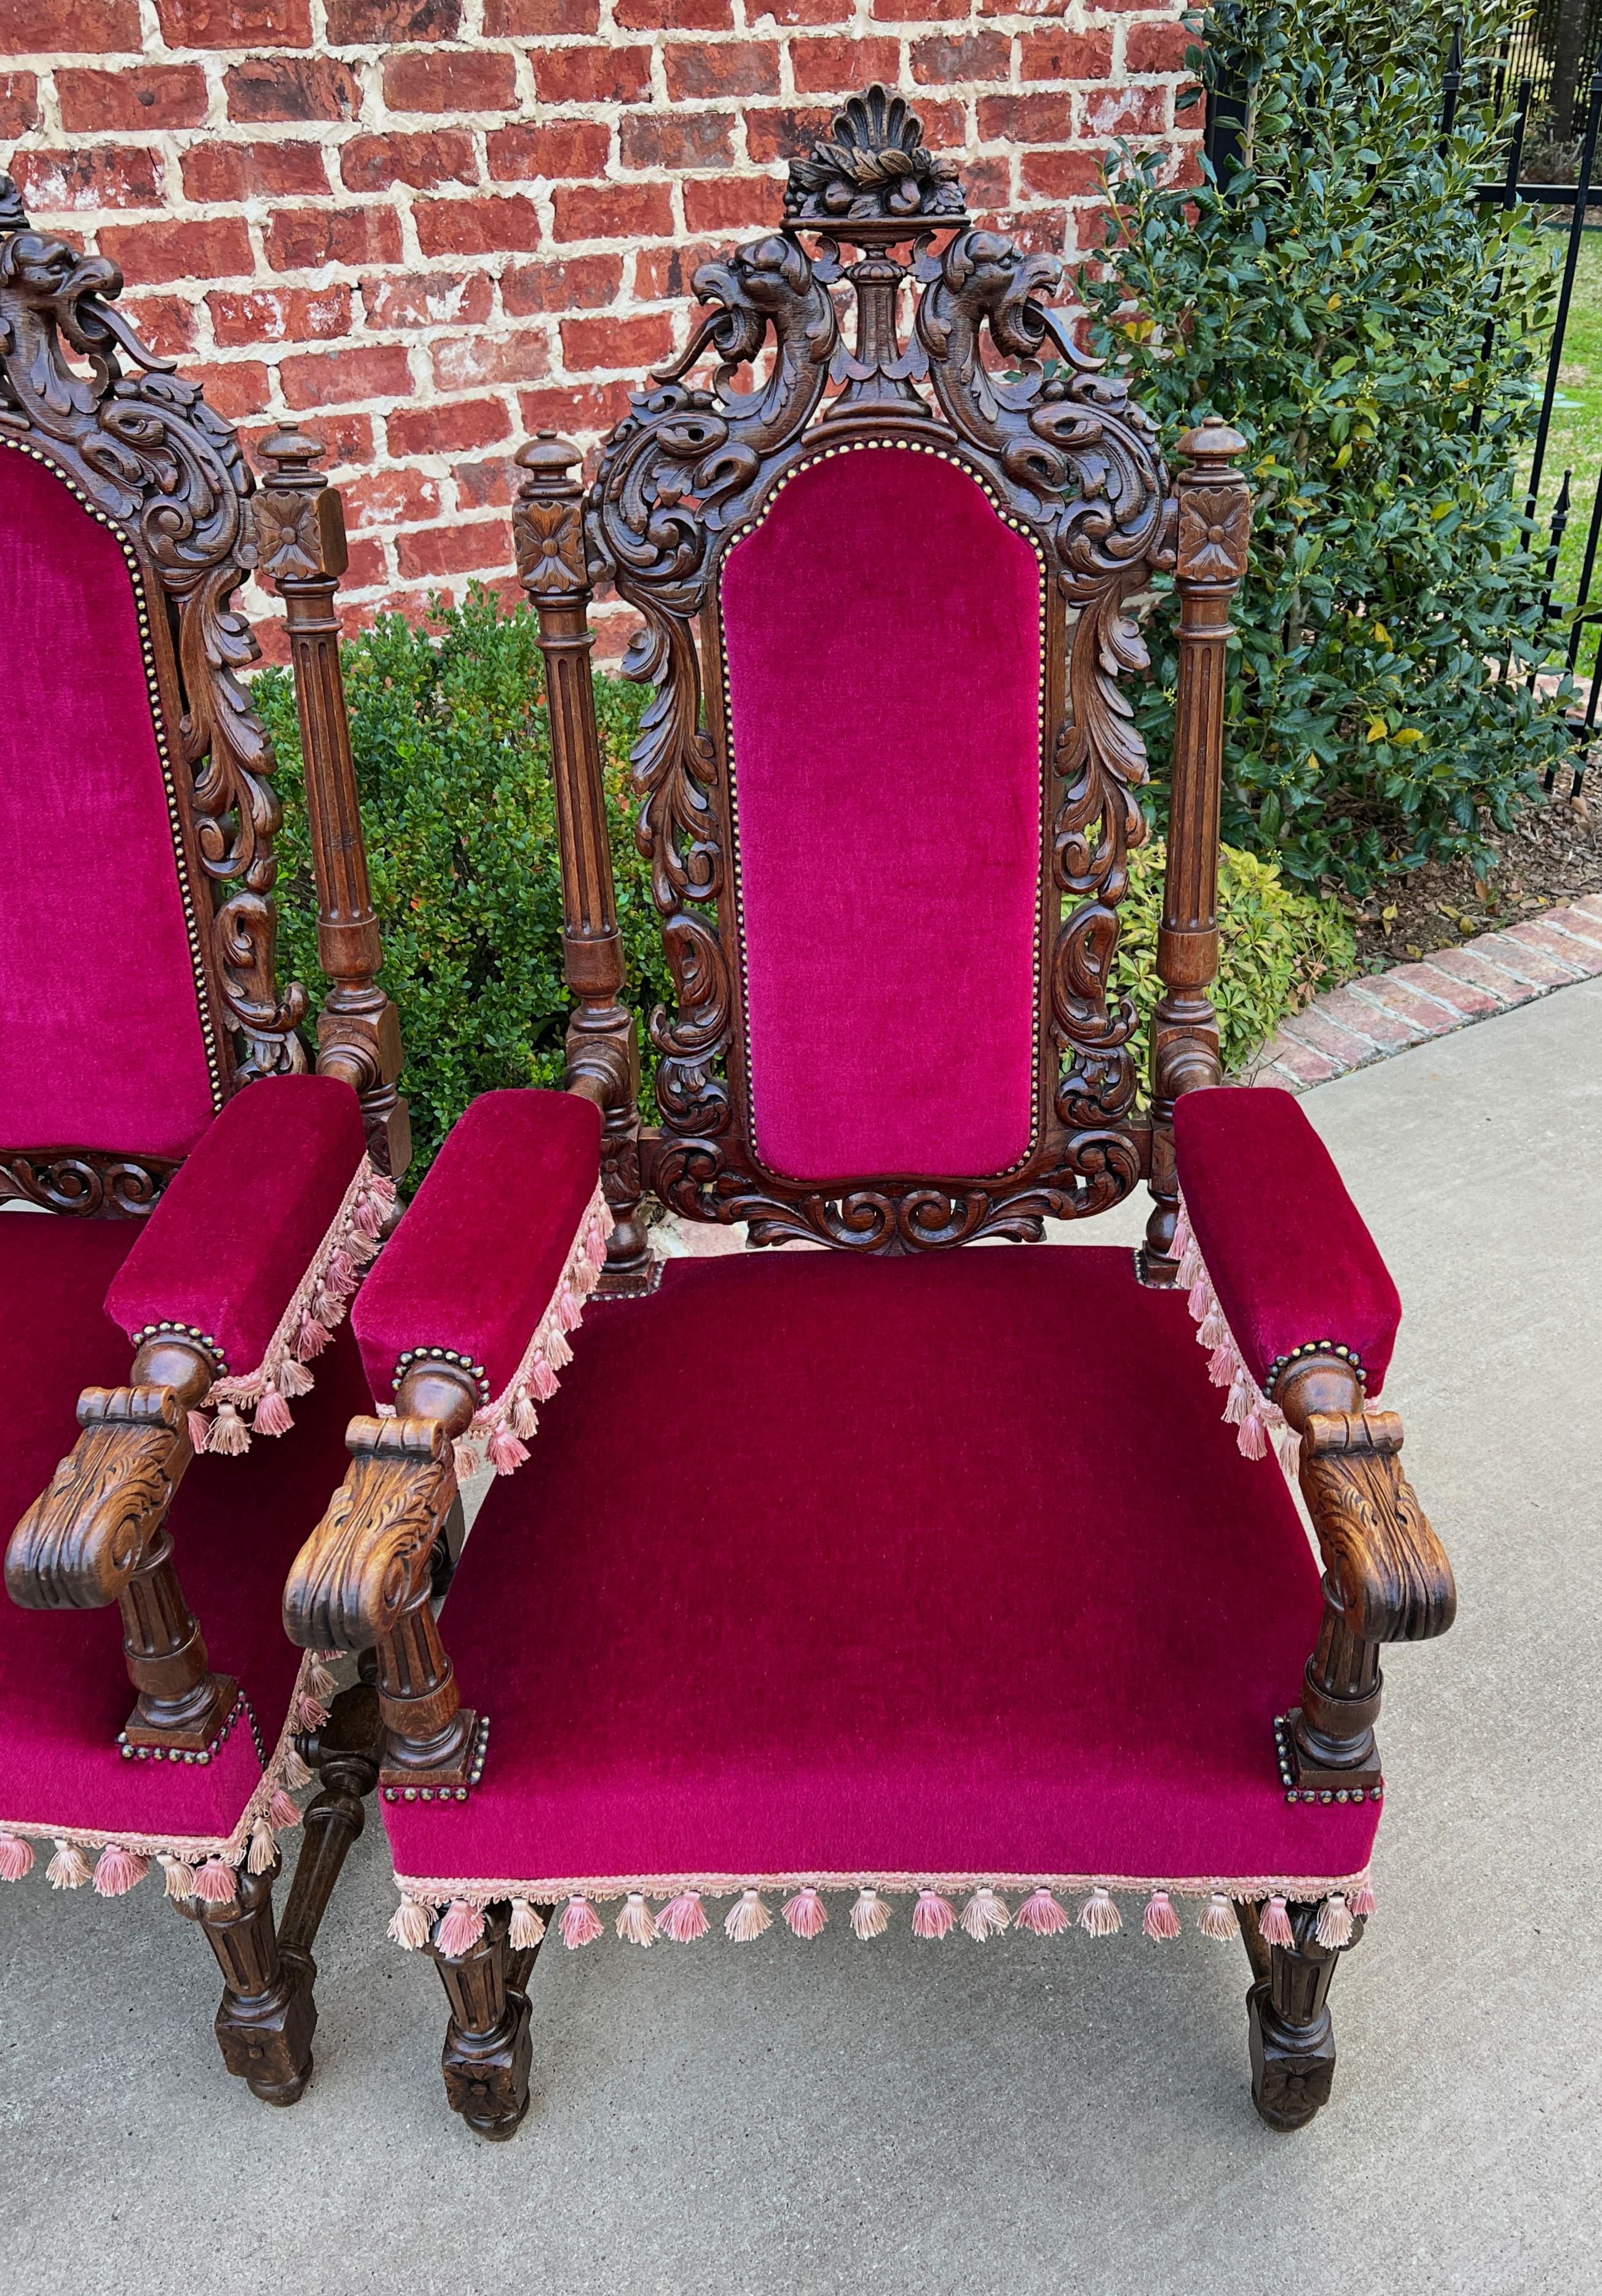 Renaissance Revival Antique French Pair Arm Chairs Fireside Throne Chairs Large Red Upholstery 19thc For Sale